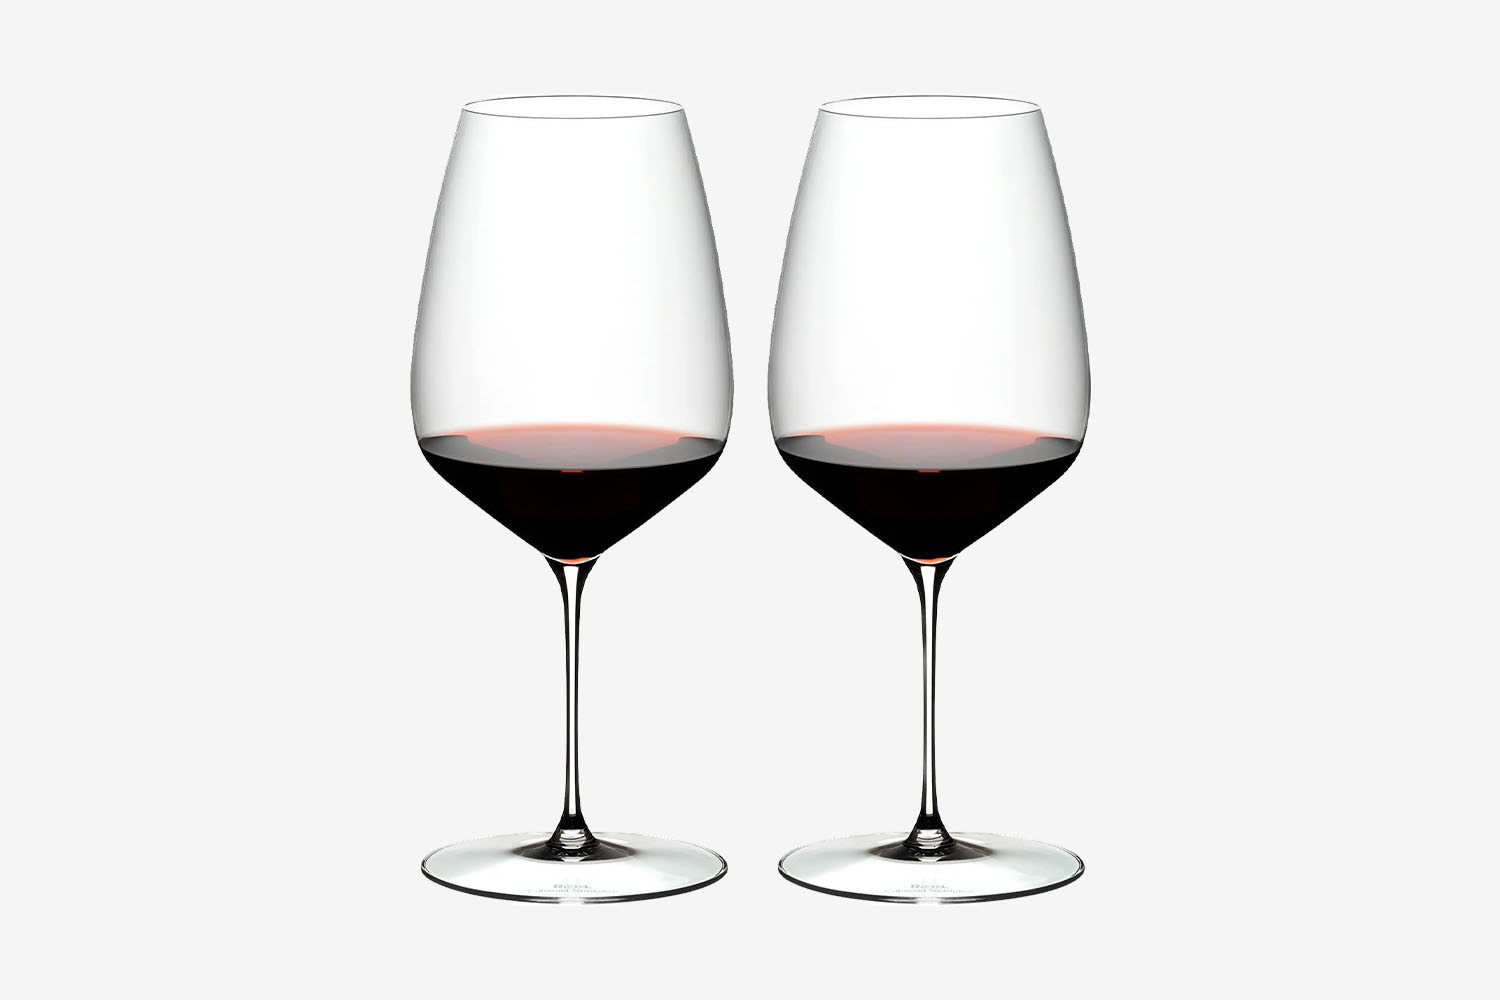 We Tested 5 of the World's Best Wine Glasses